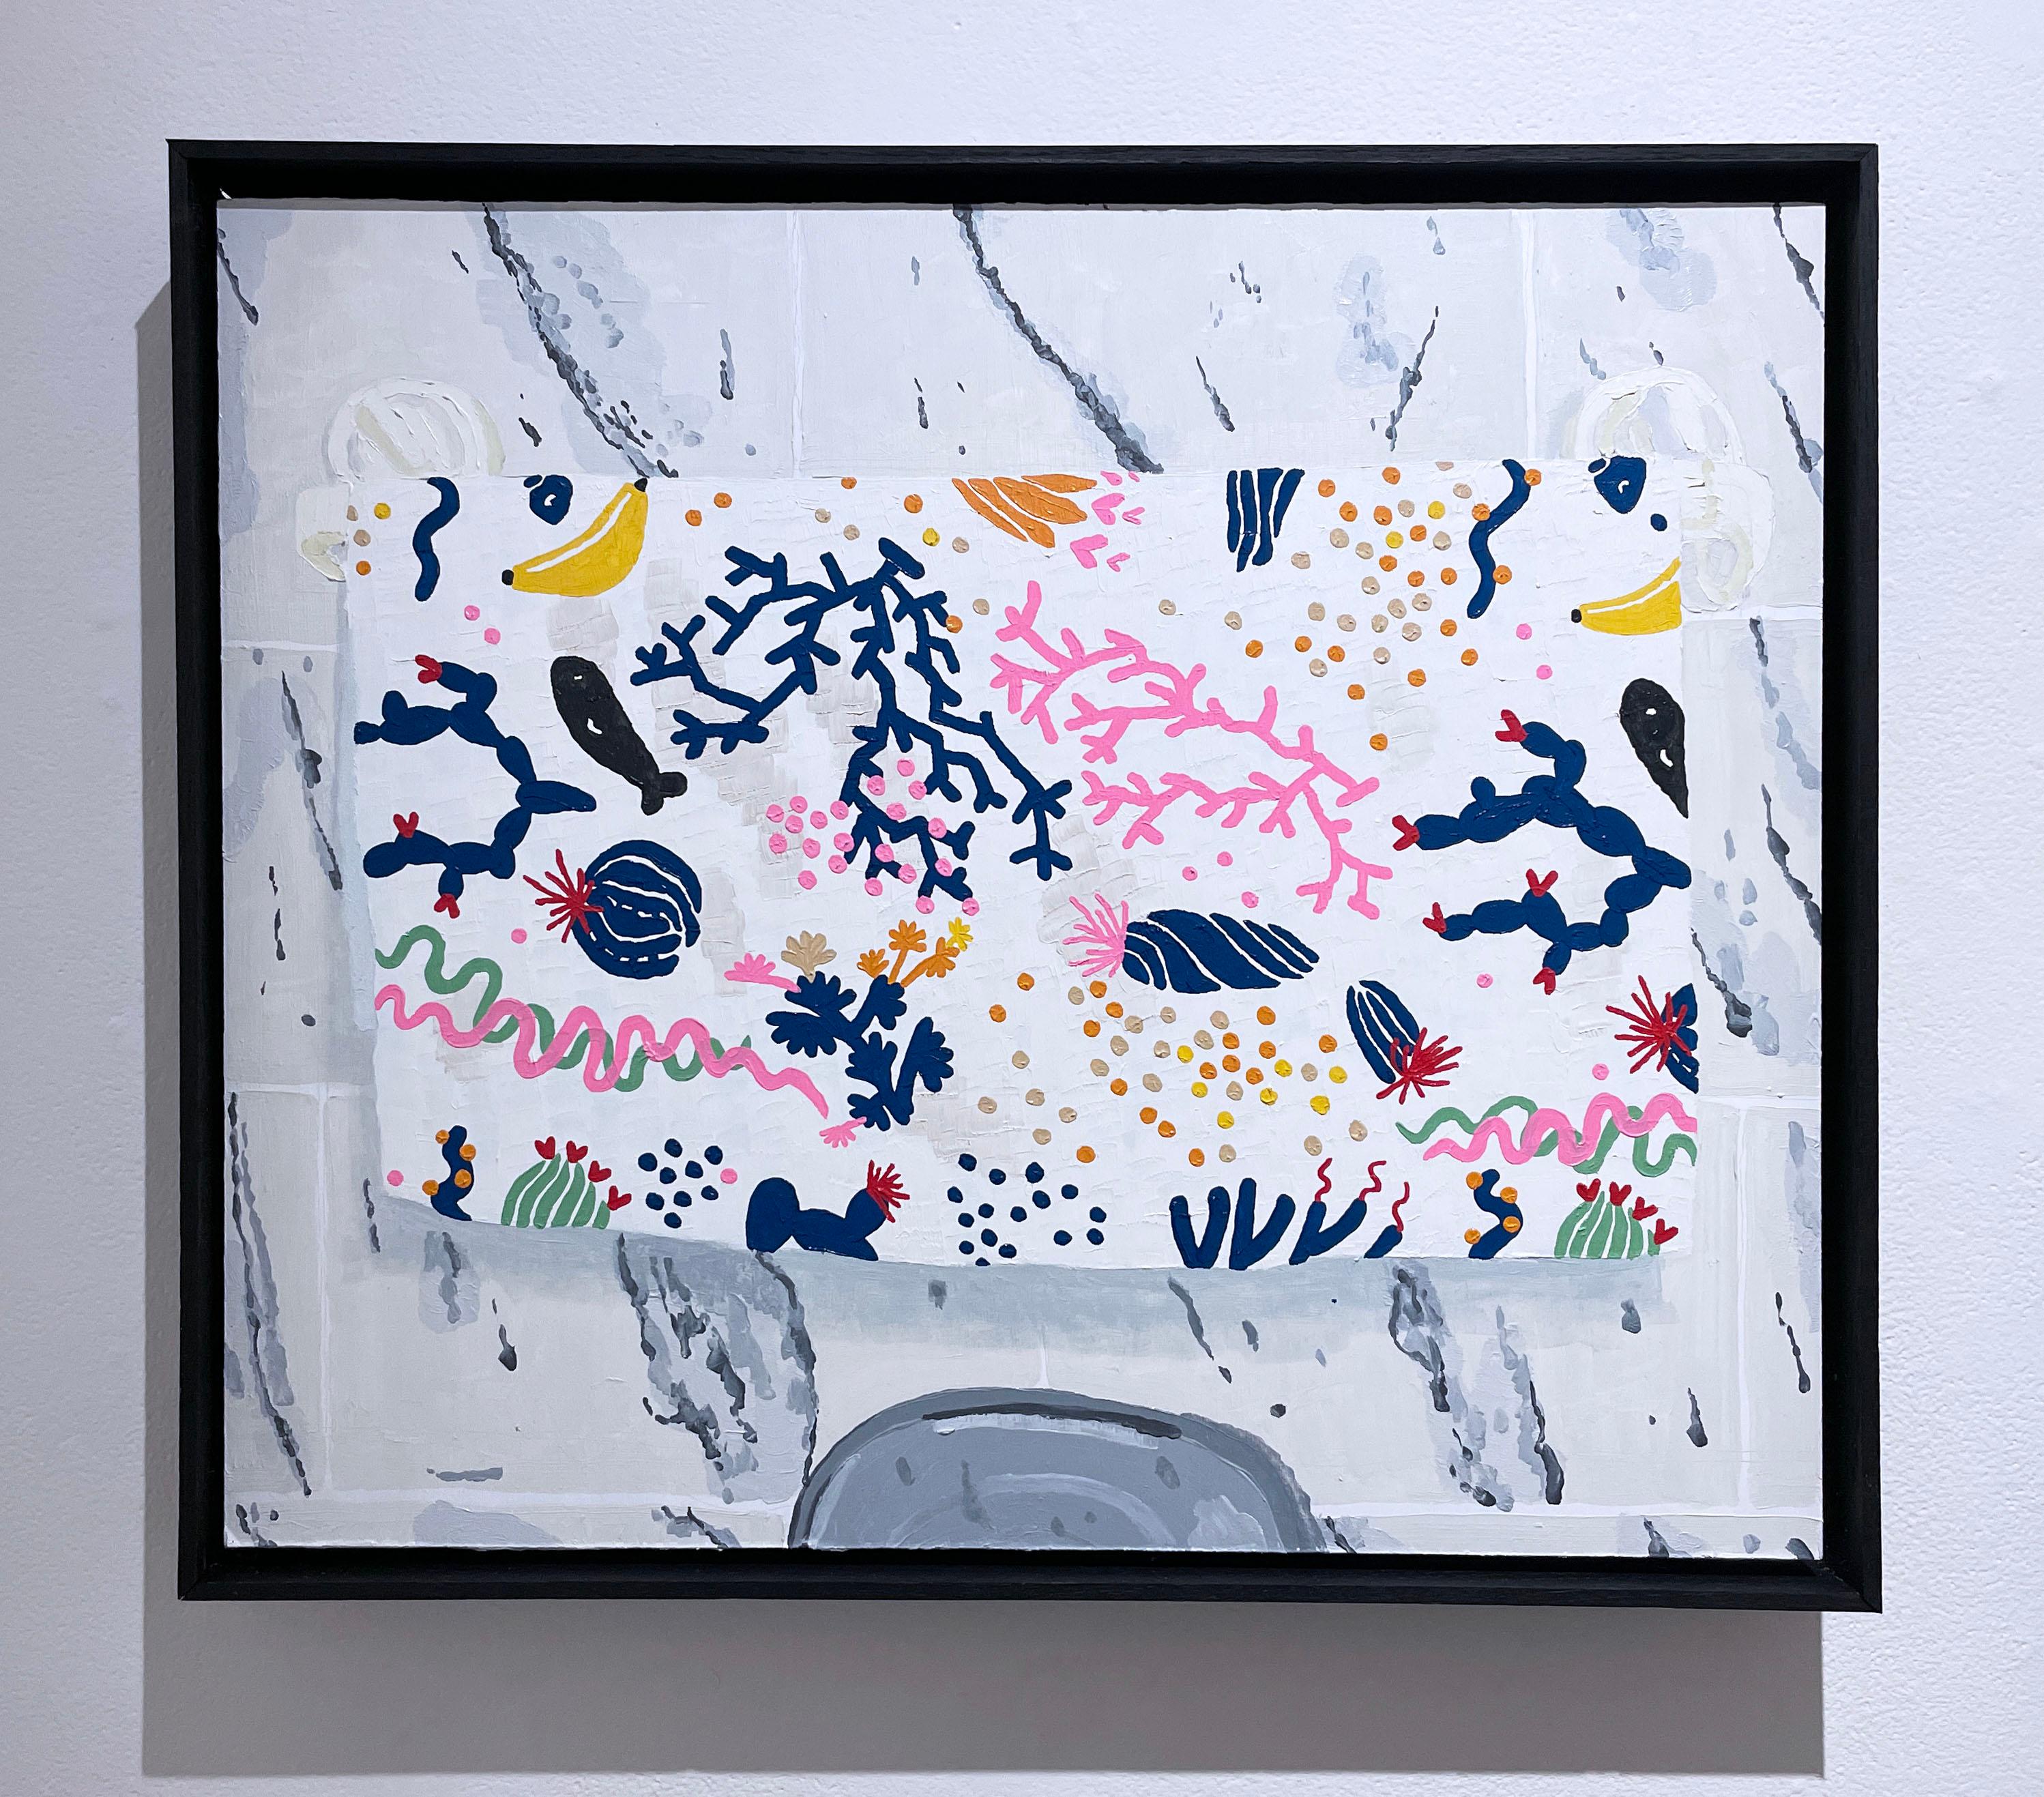 IKEA (2022), oil on wood panel, coral reef, banana, bright pattern, faux naif - Painting by Max Vesuvius Budnick